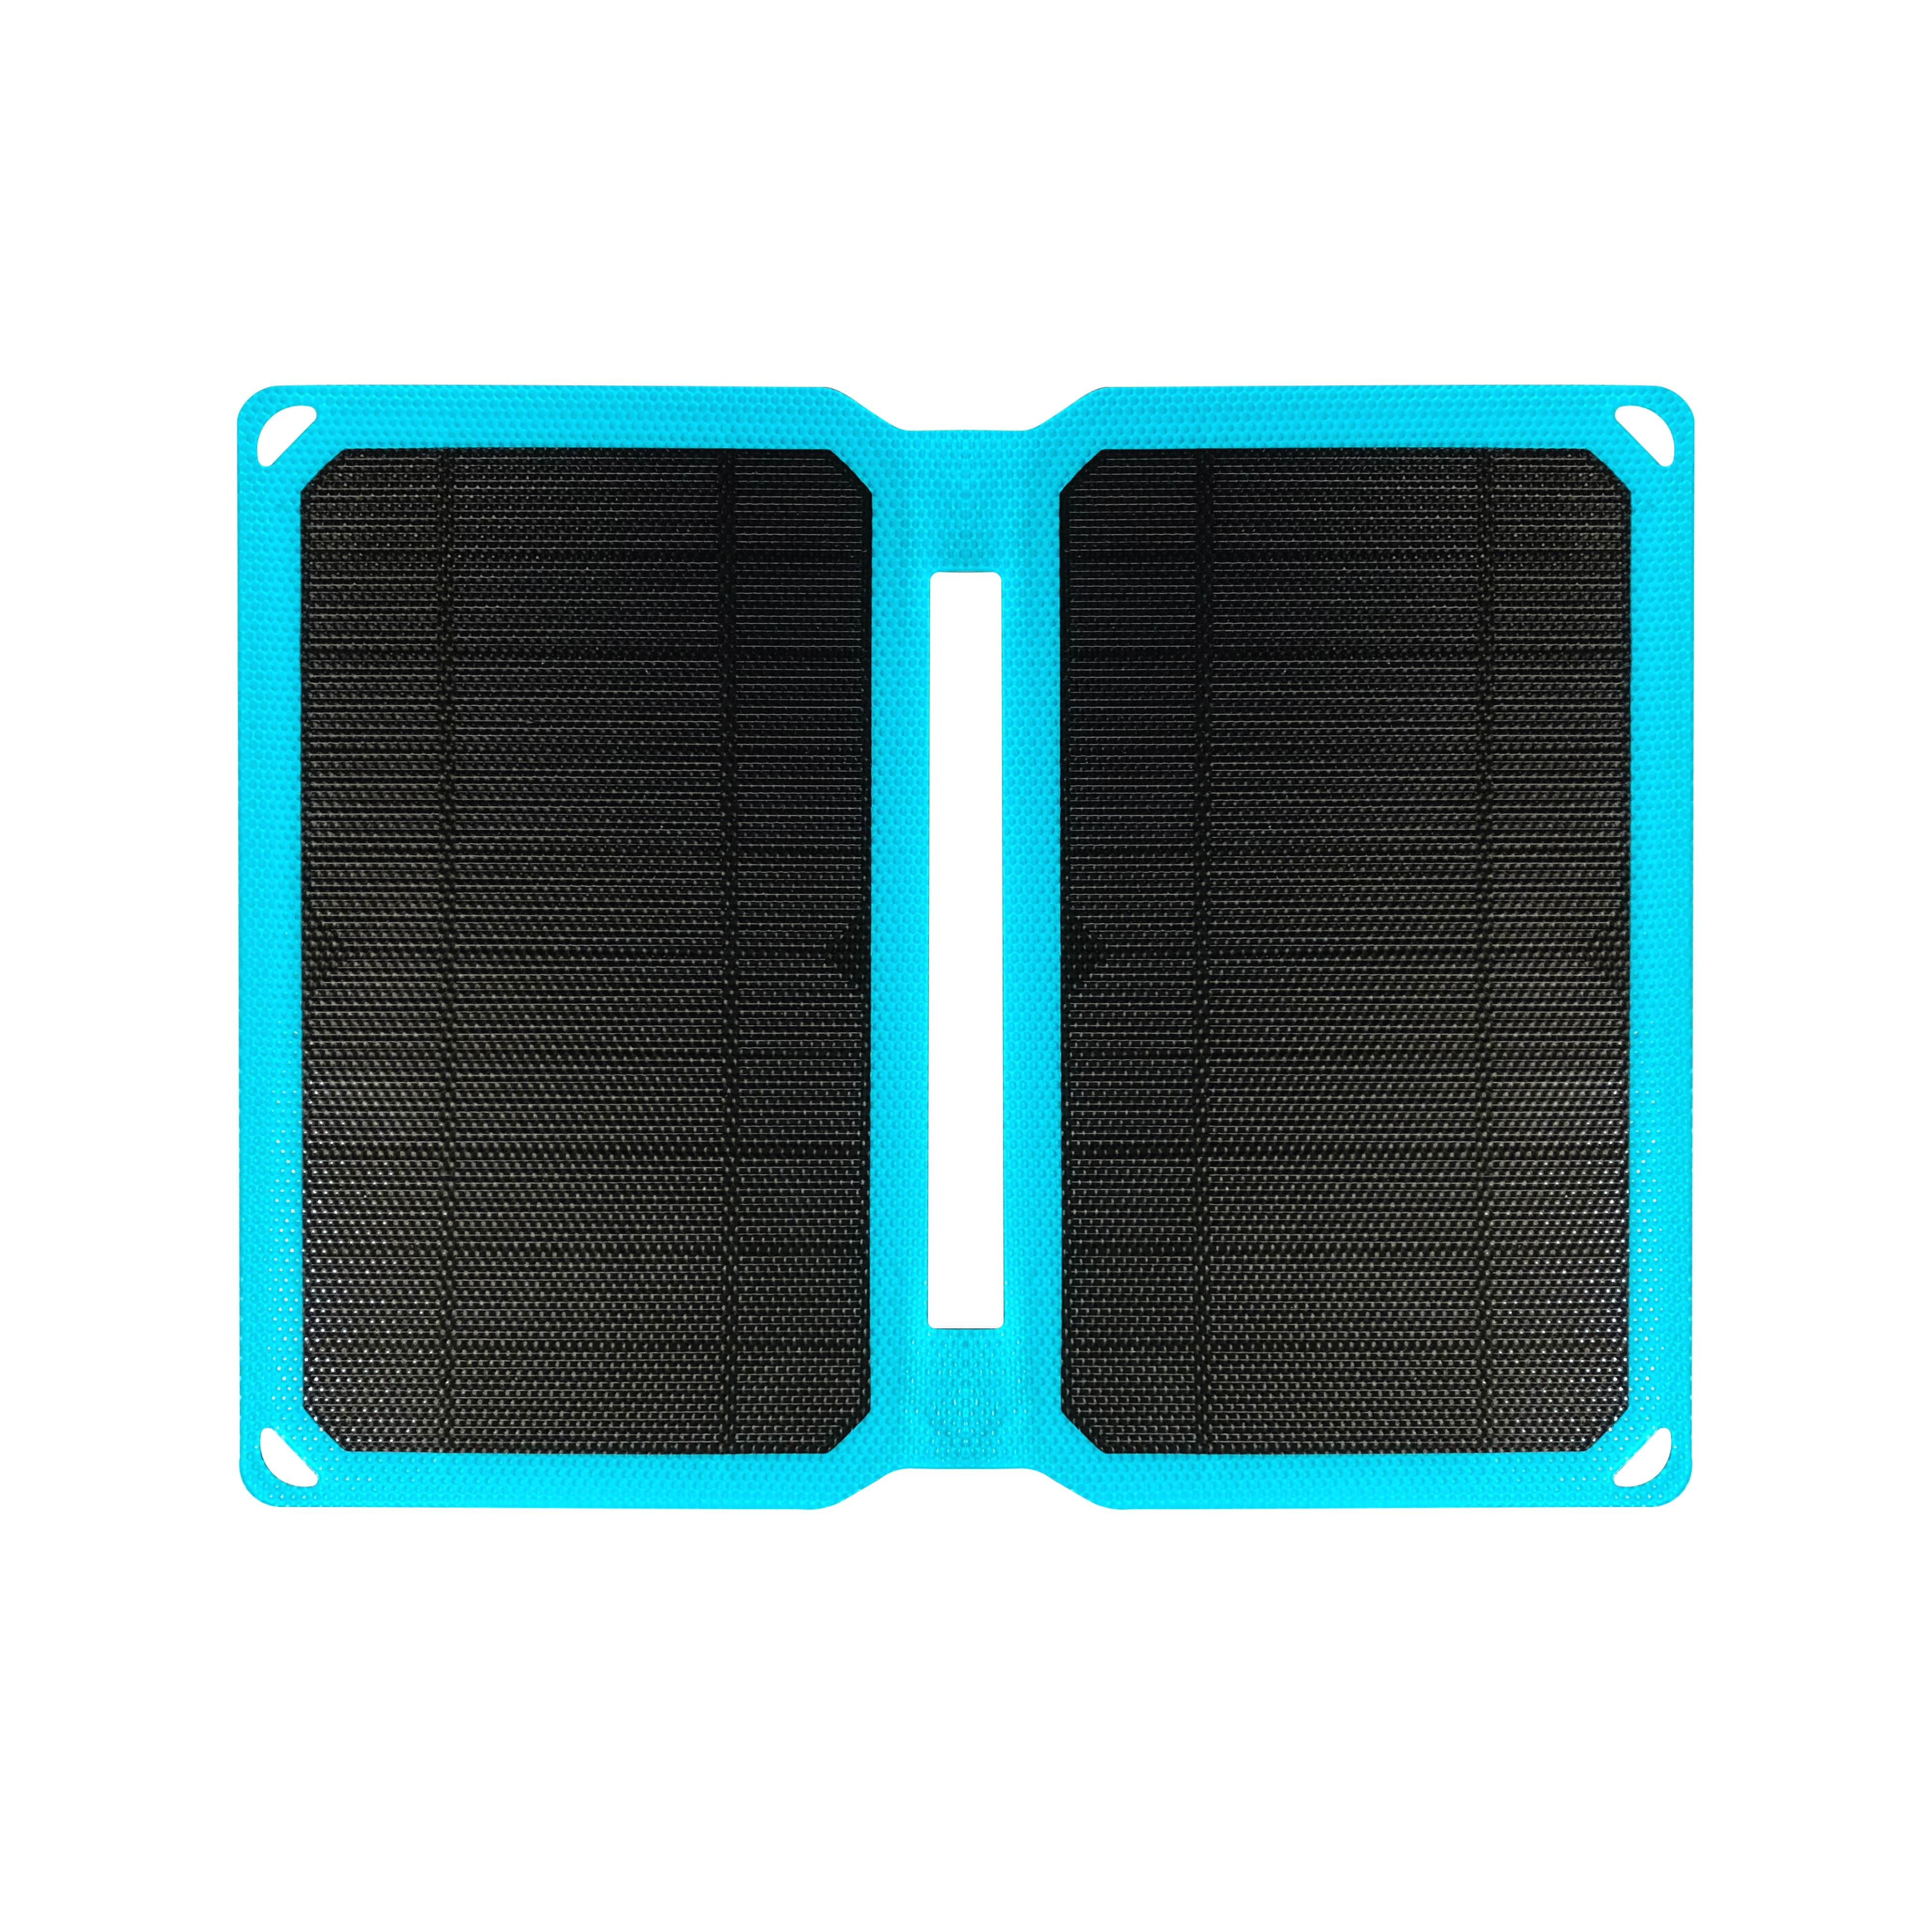 Portable Folding Solar Panel Charger Outdoor 10 Watt Camping Survival Cell Phone